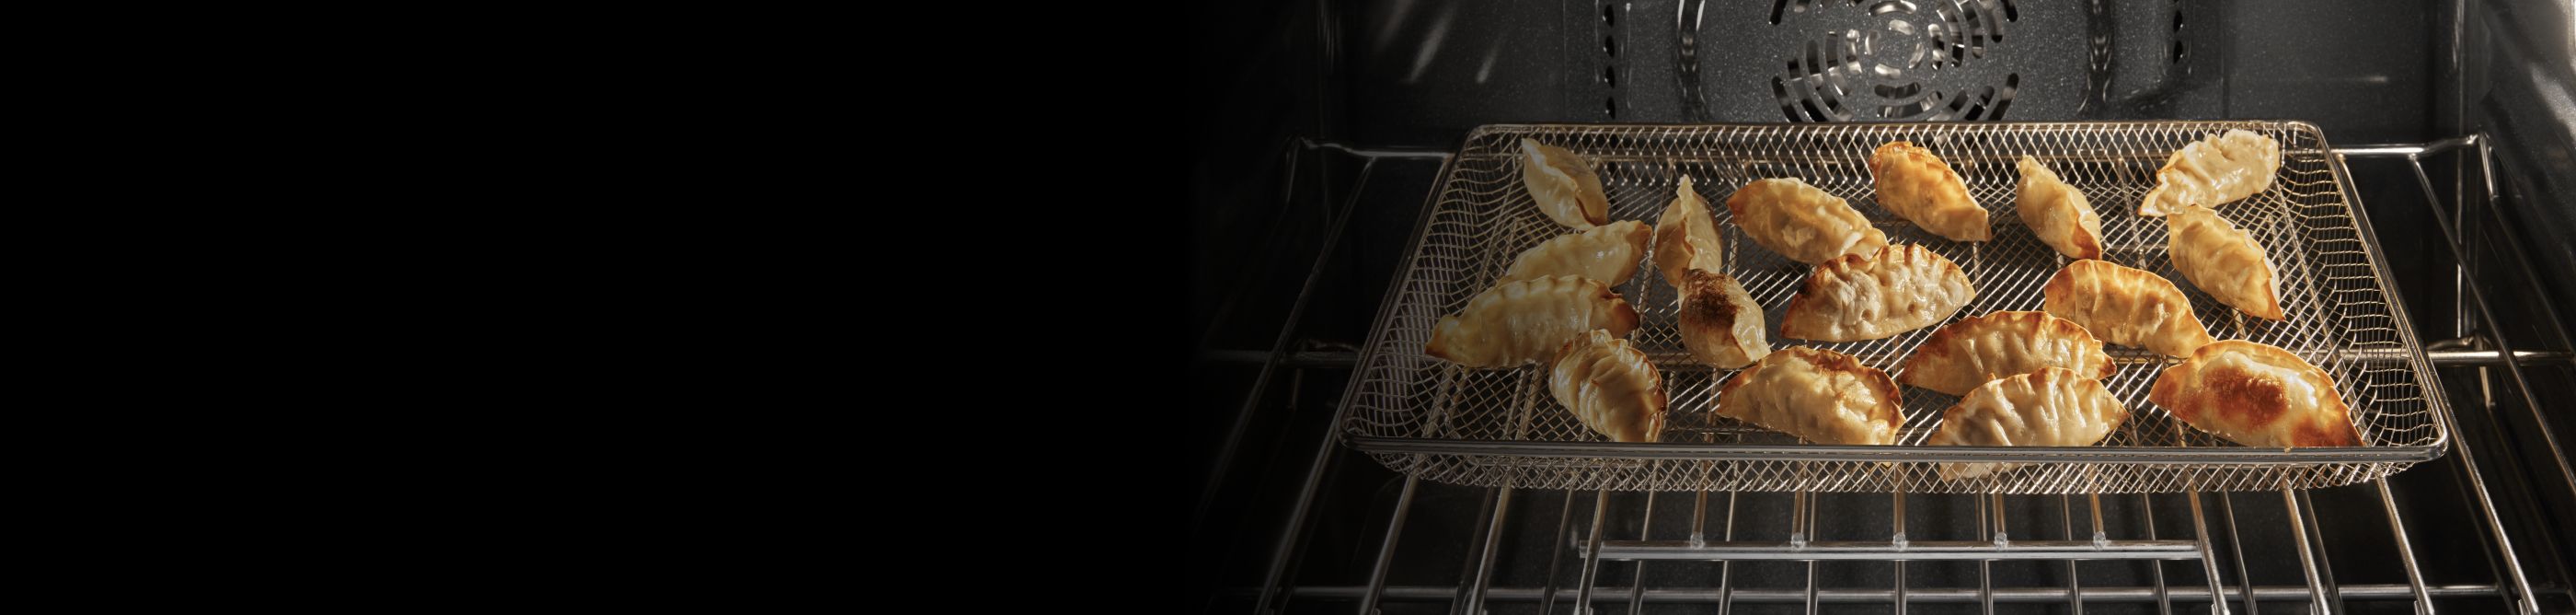 Several potstickers in a basket inside an oven